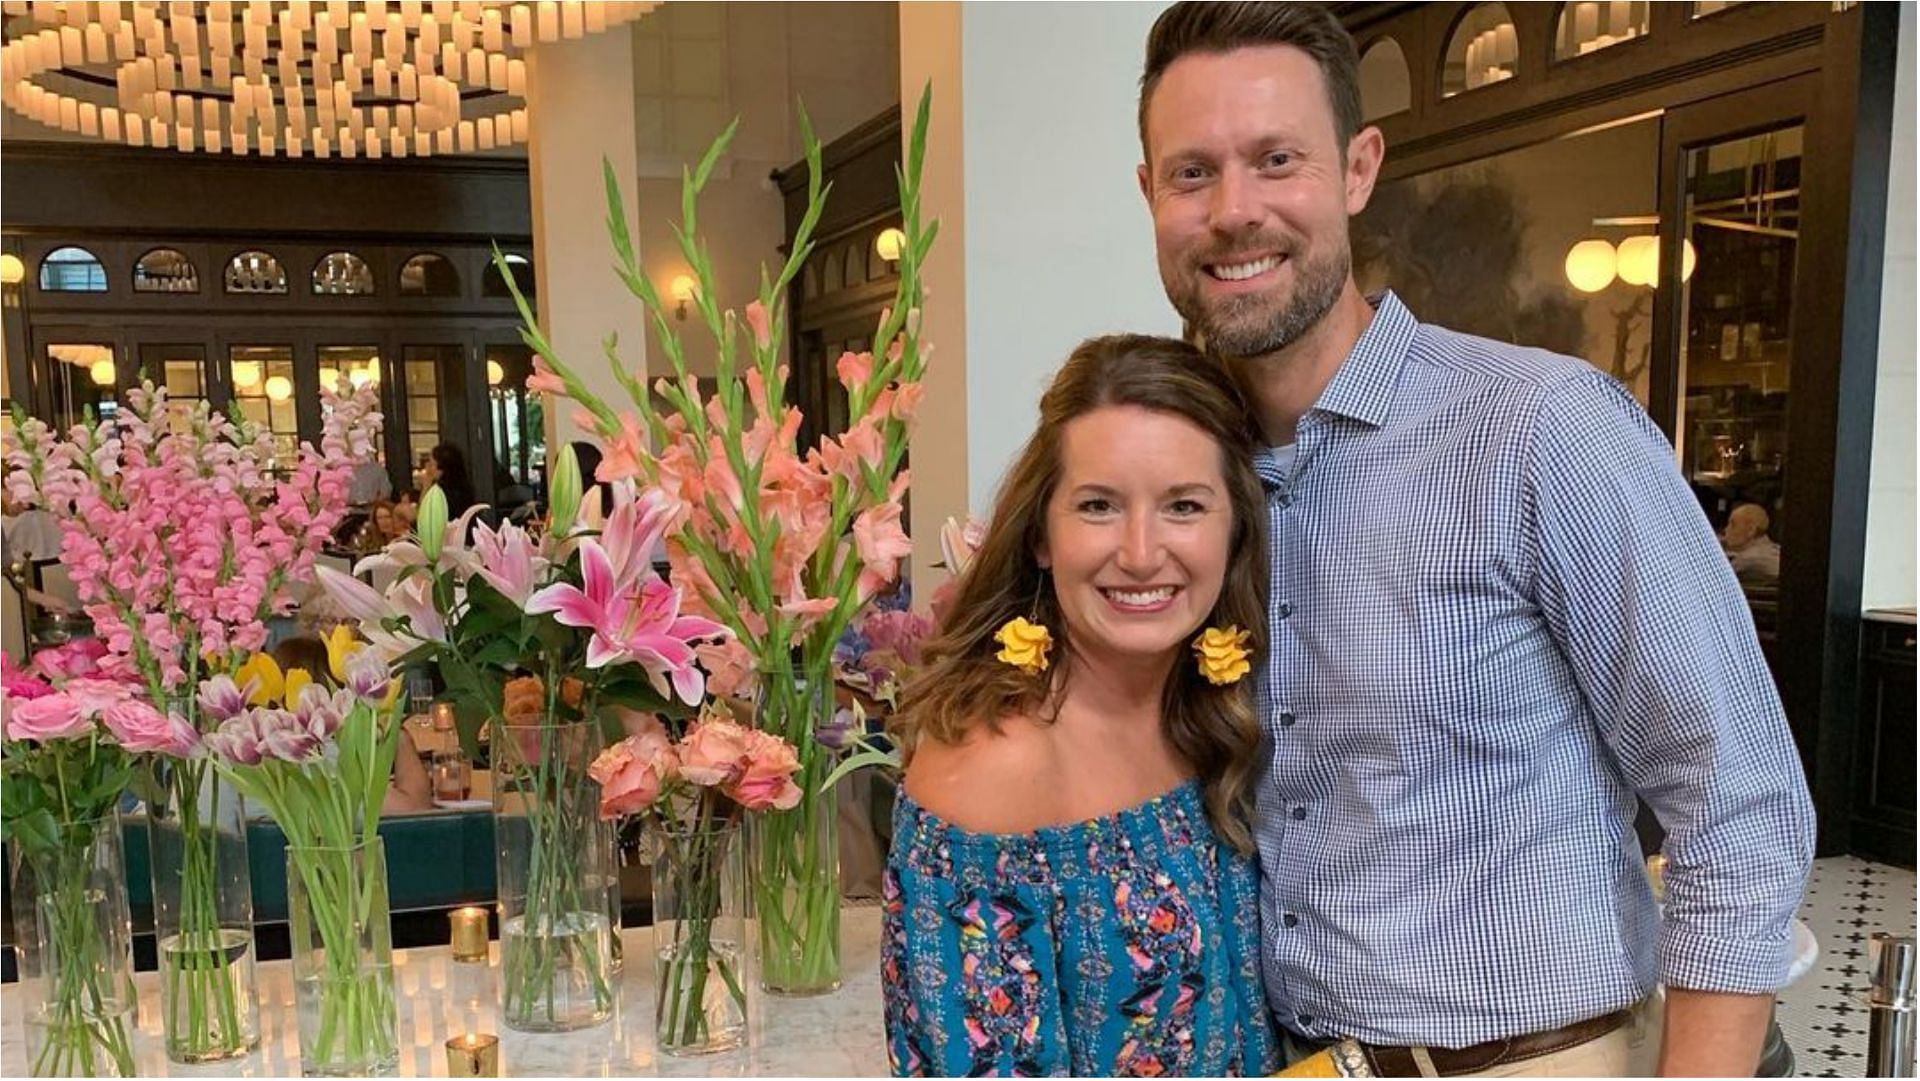 Jason Myers and Jillian Myers were married for a long time (Image via jmyersweather/Instagram)